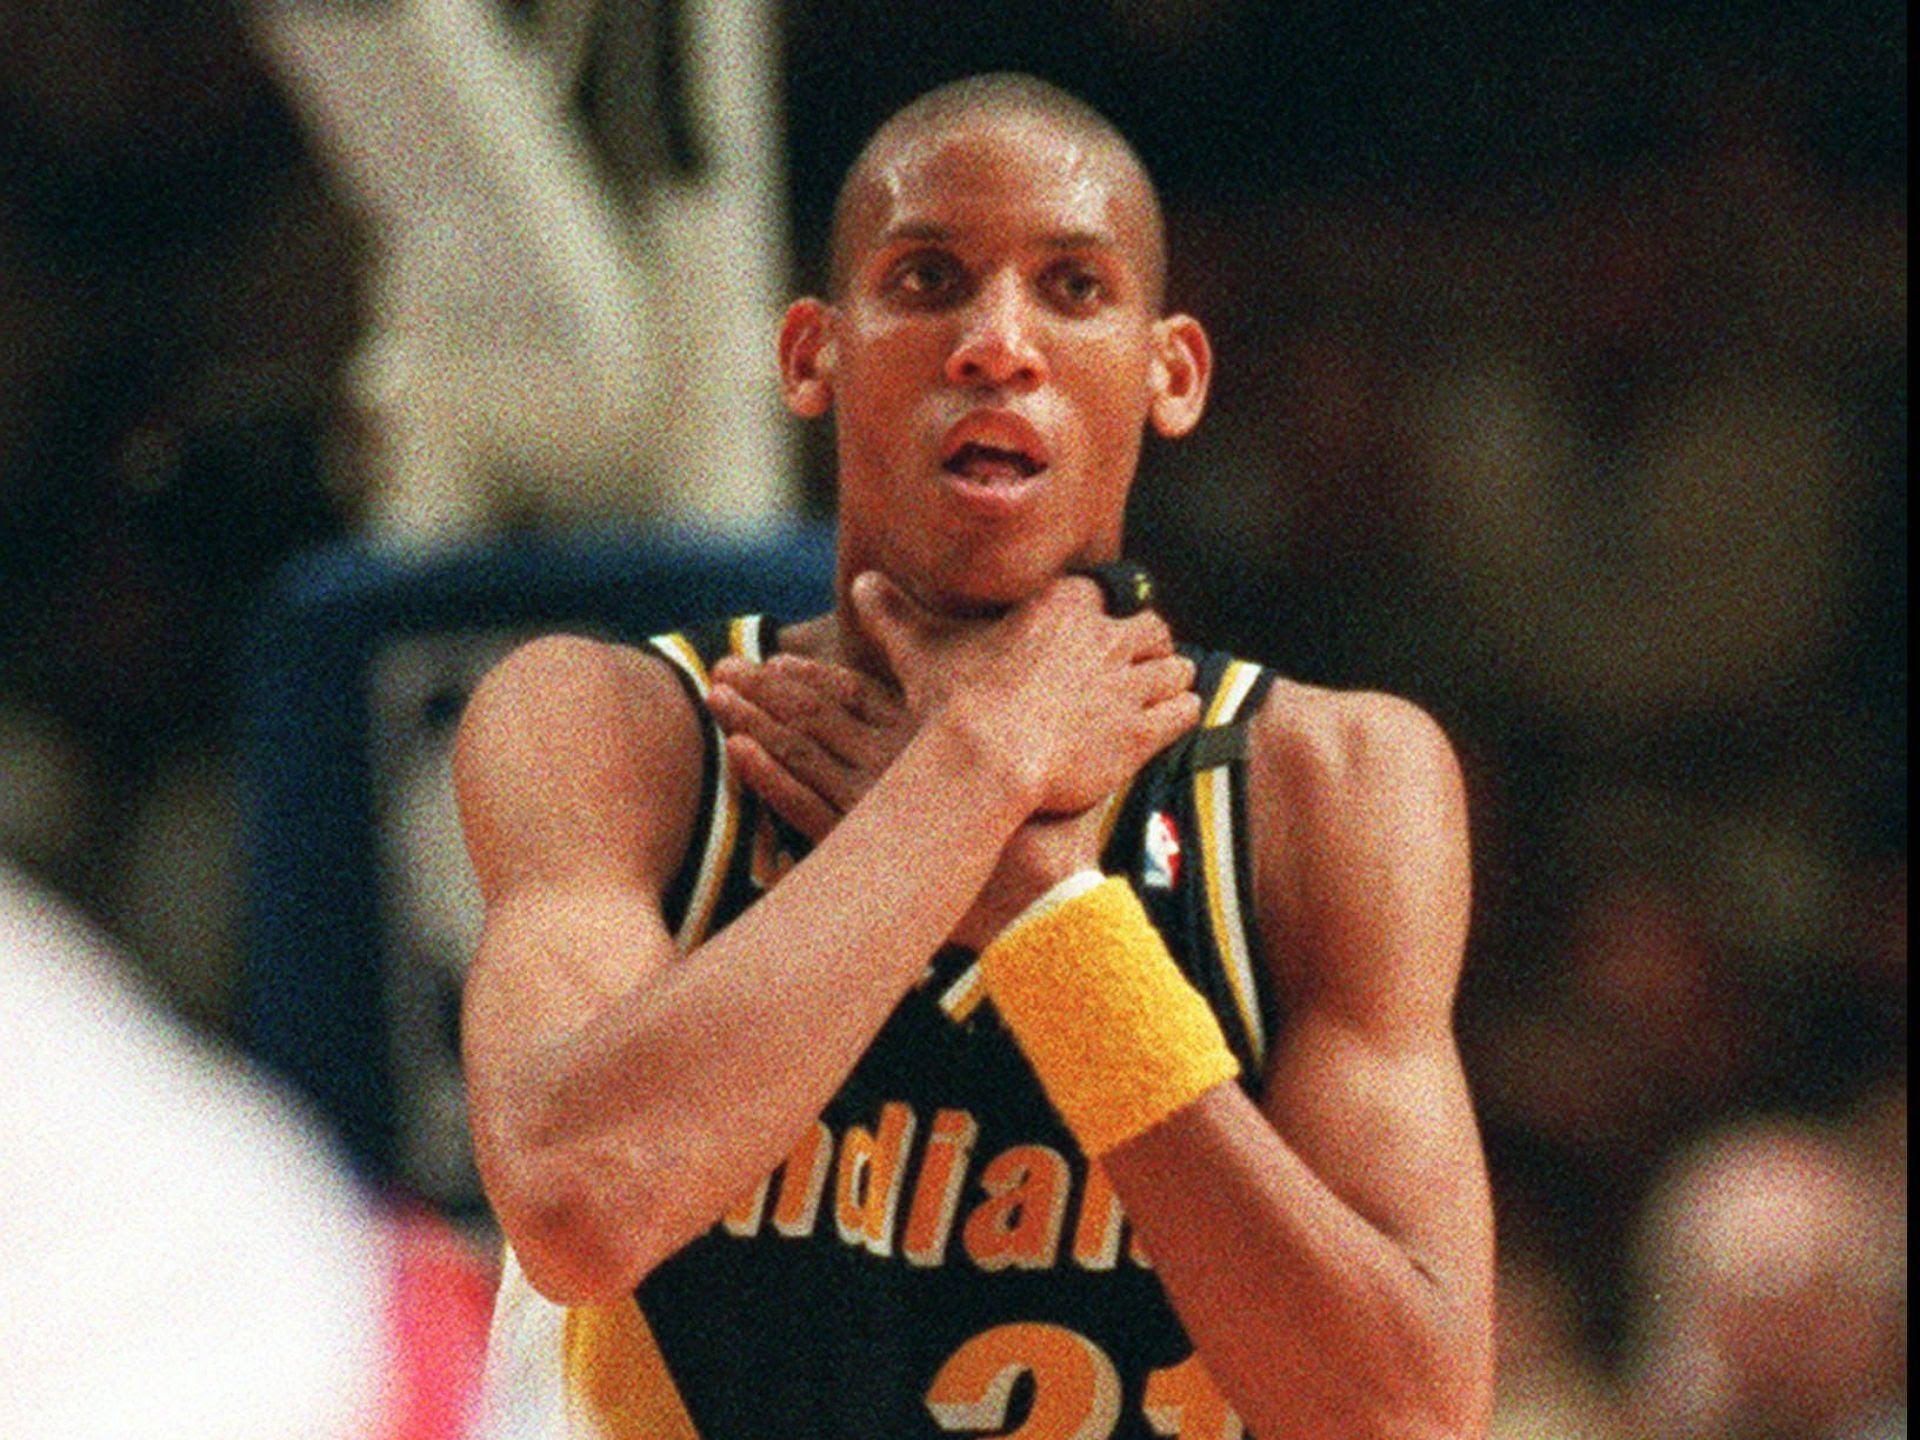 Reggie Miller. The Most Overrated Player of all Time